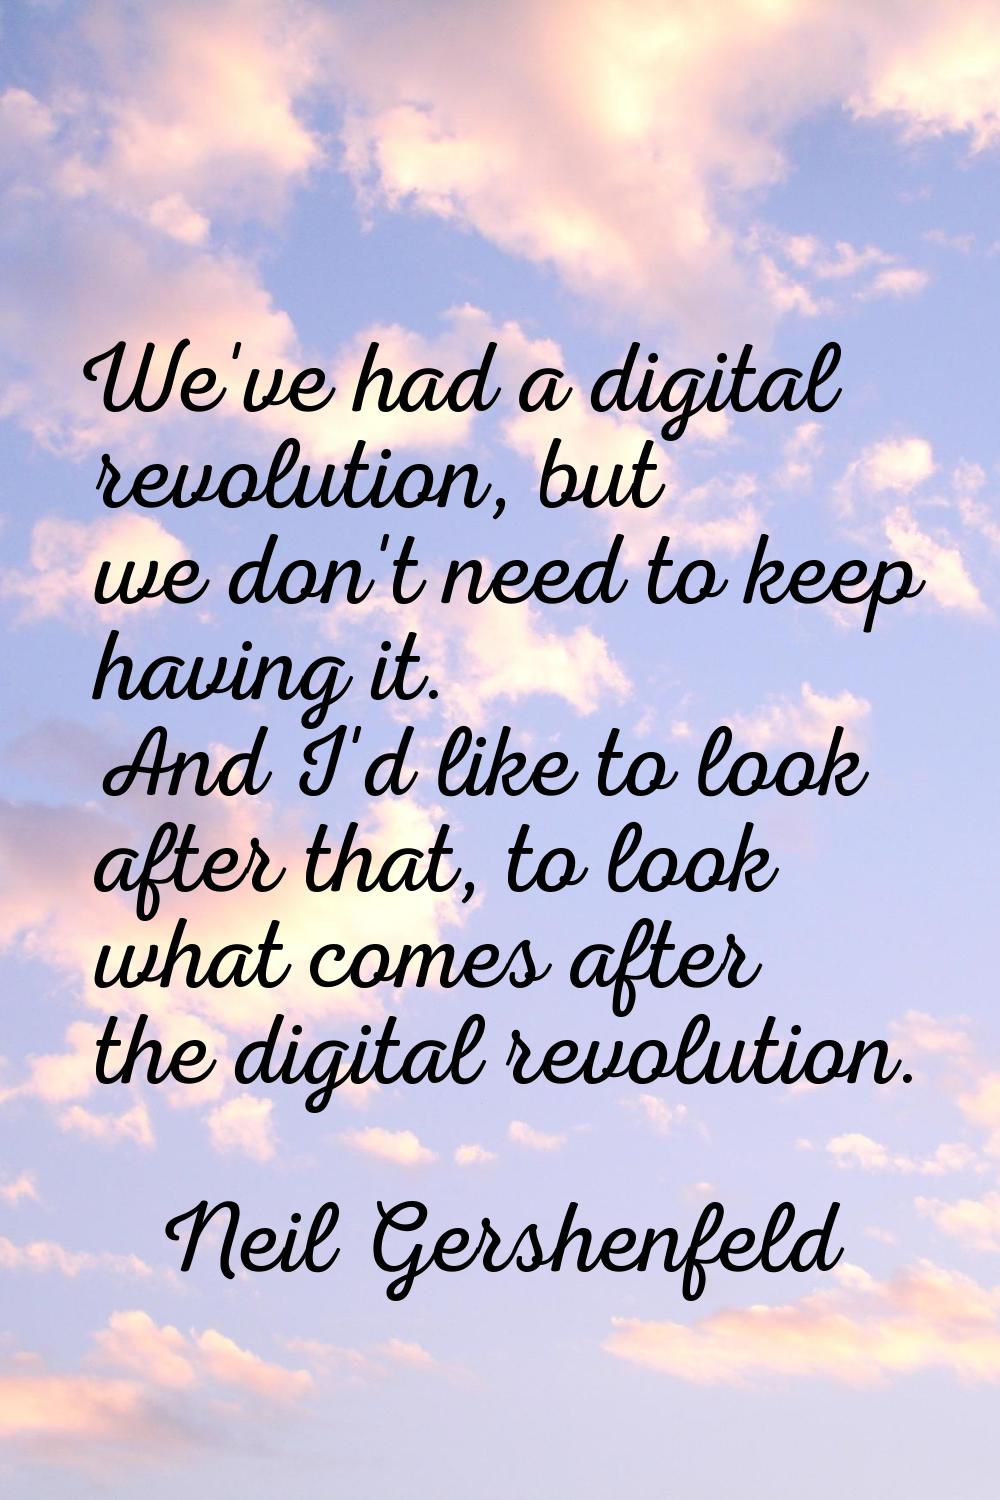 We've had a digital revolution, but we don't need to keep having it. And I'd like to look after tha